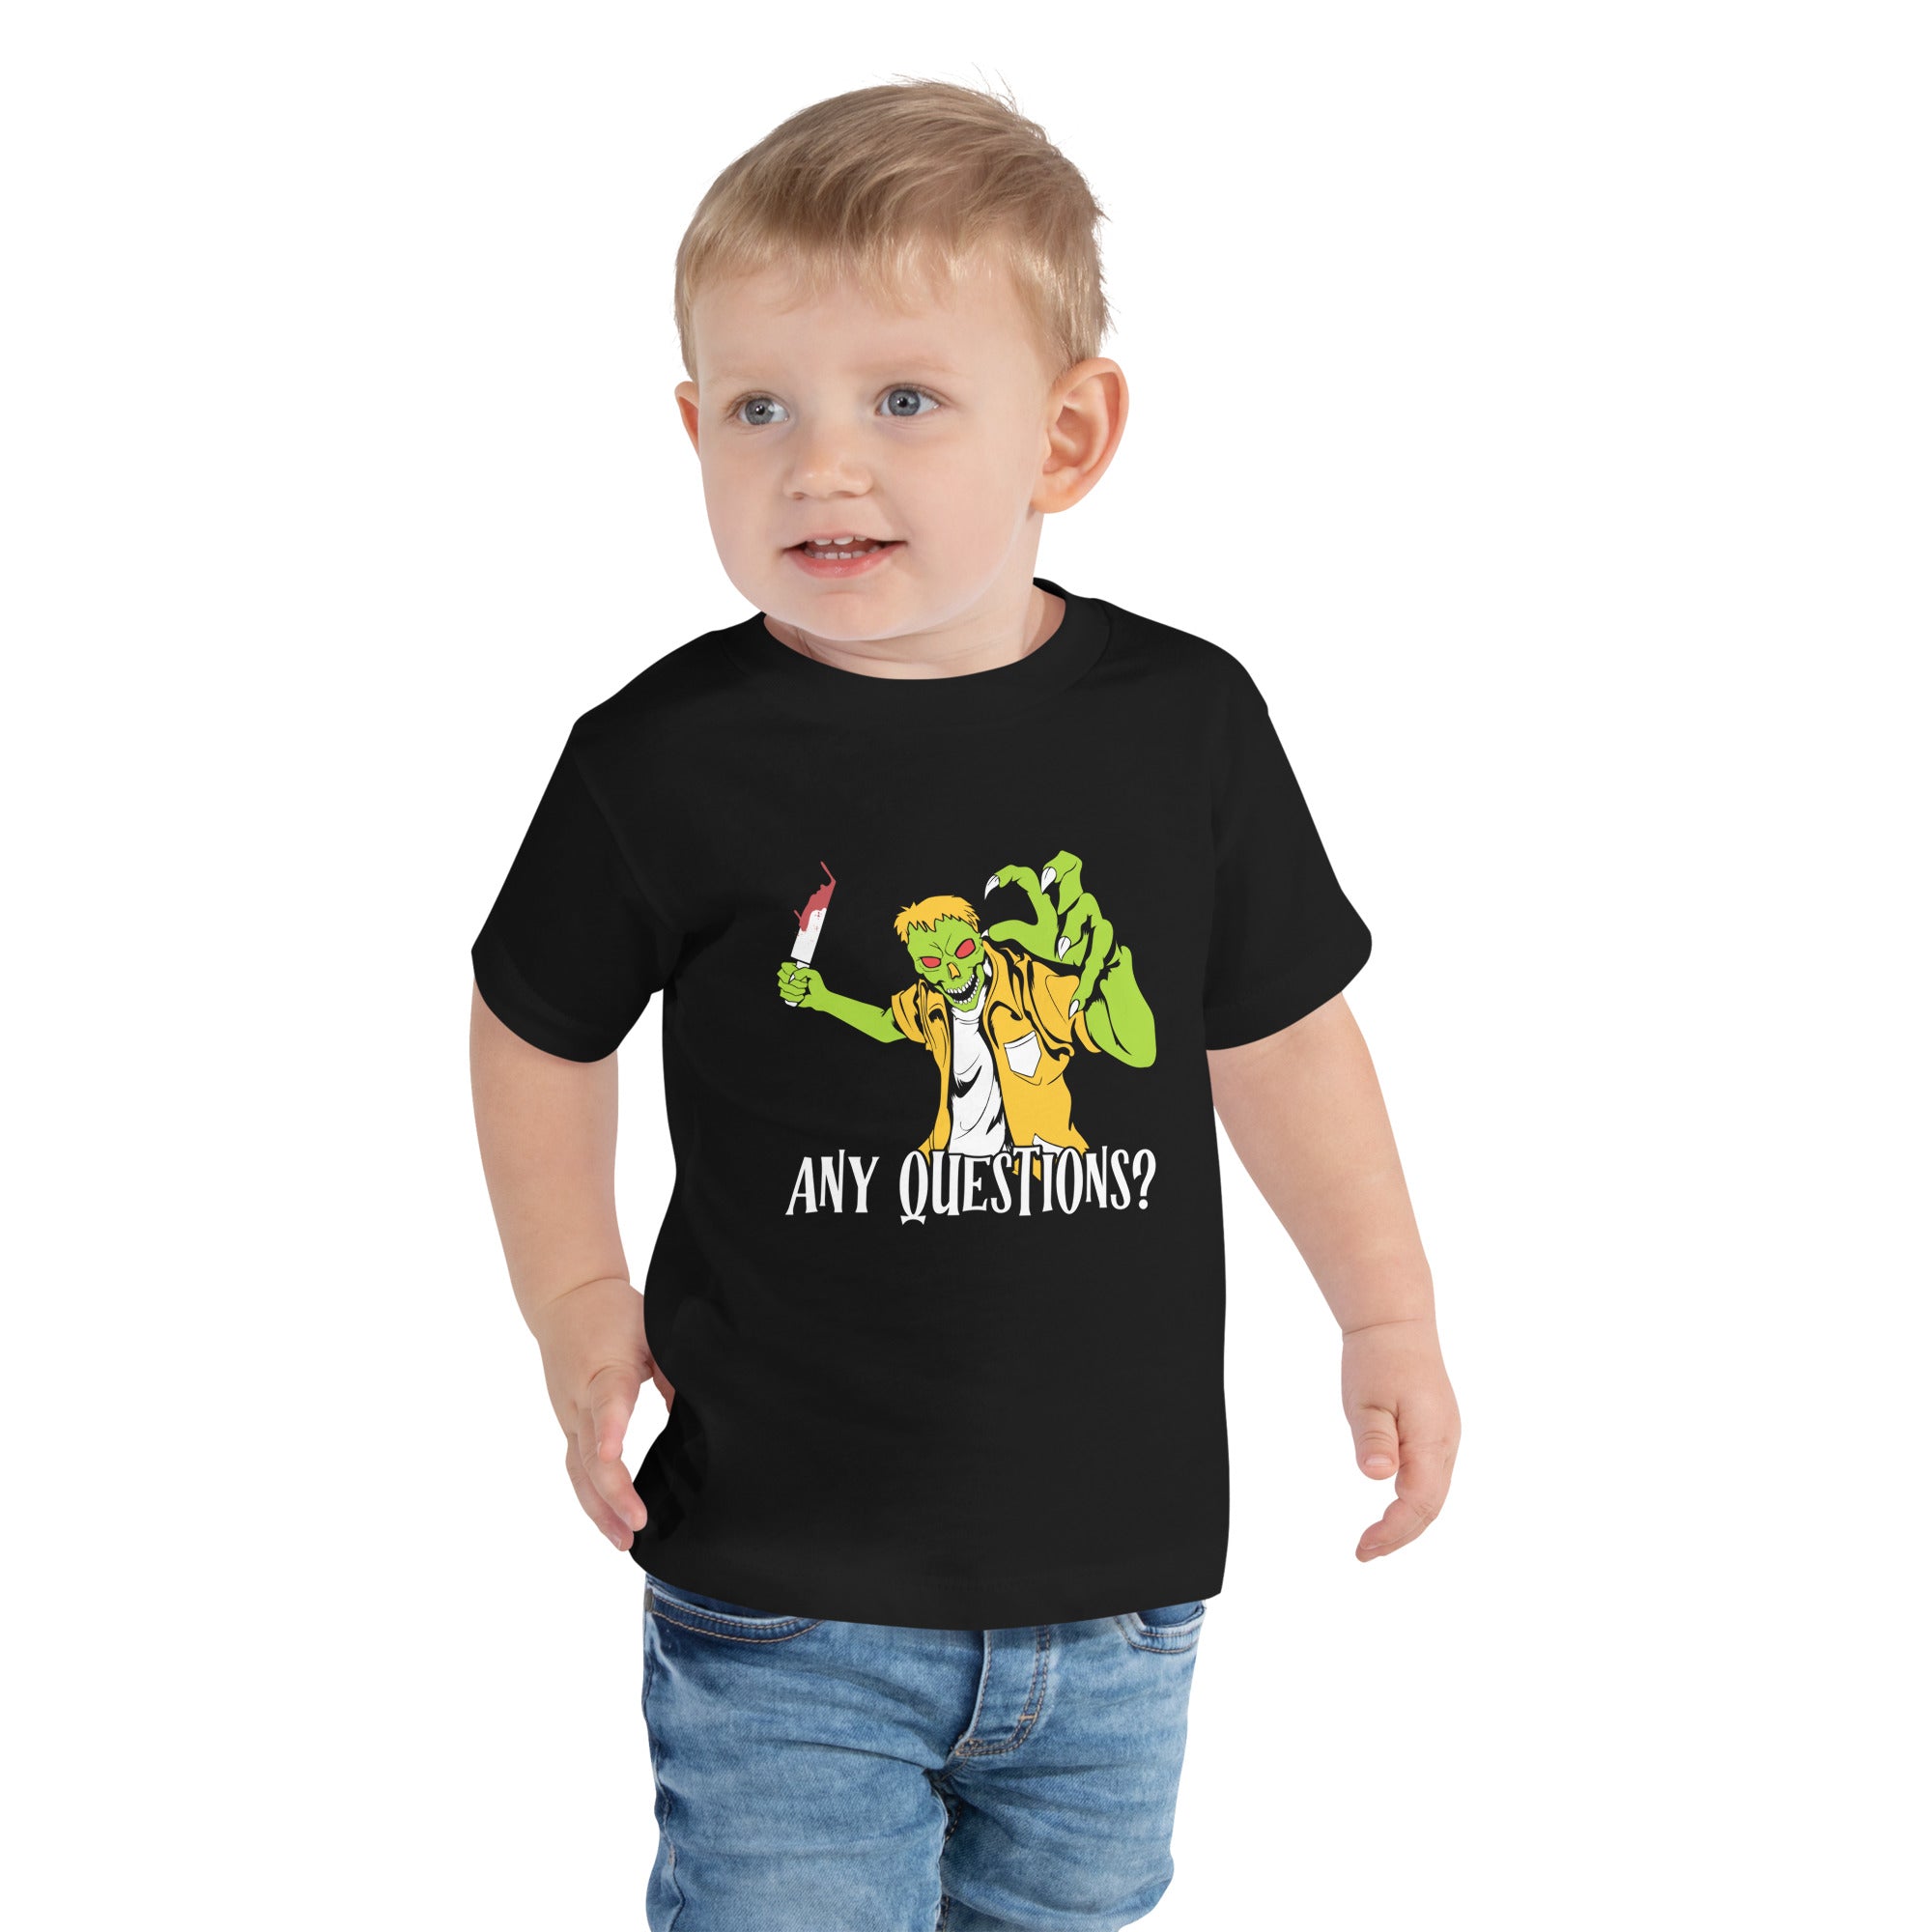 Any Questions? Halloween Zombie Holding Bloody Knife Horror Scary Zombie Costume Kid's T-Shirt